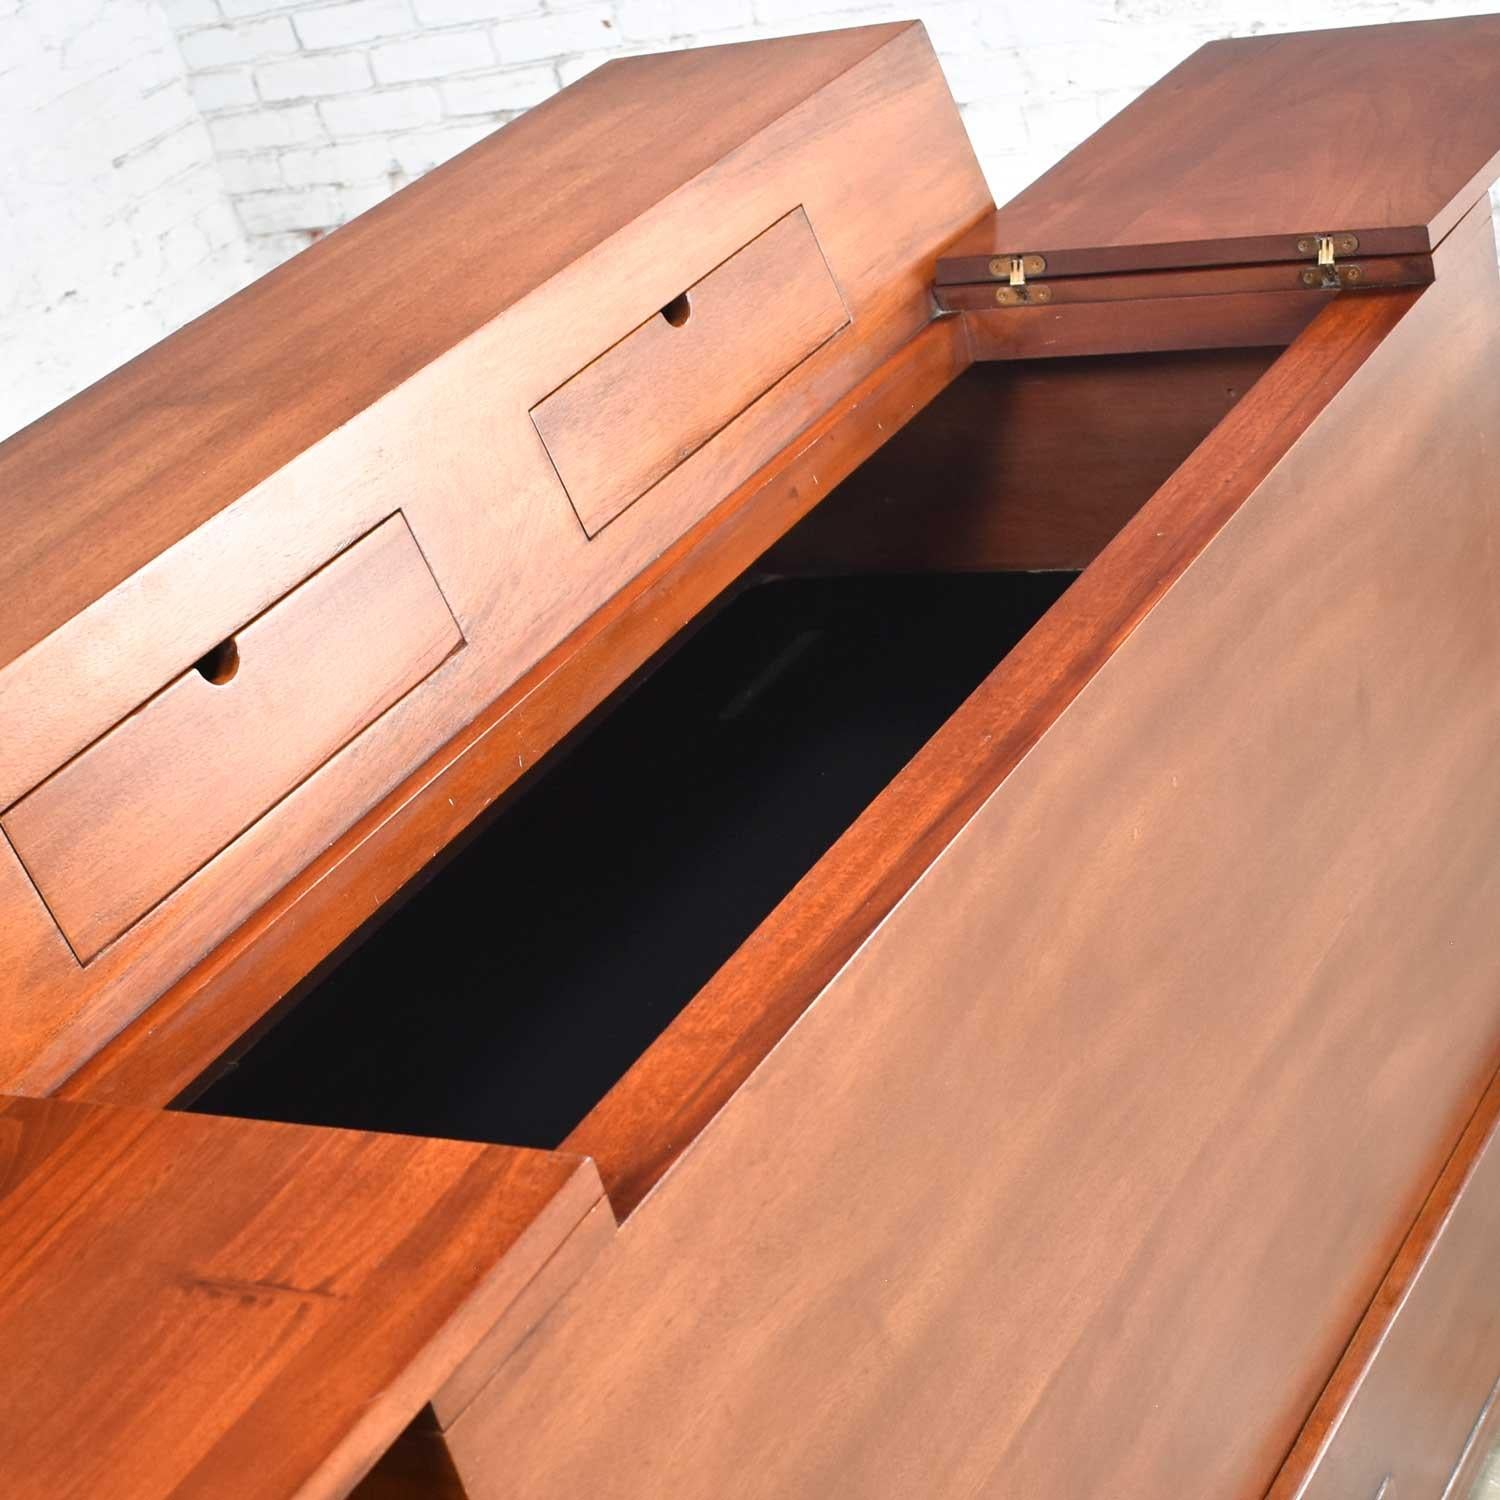 Art Deco Style Mahogany Entry Desk or Bar by IMA S.A. Bogota, Colombia For Sale 3